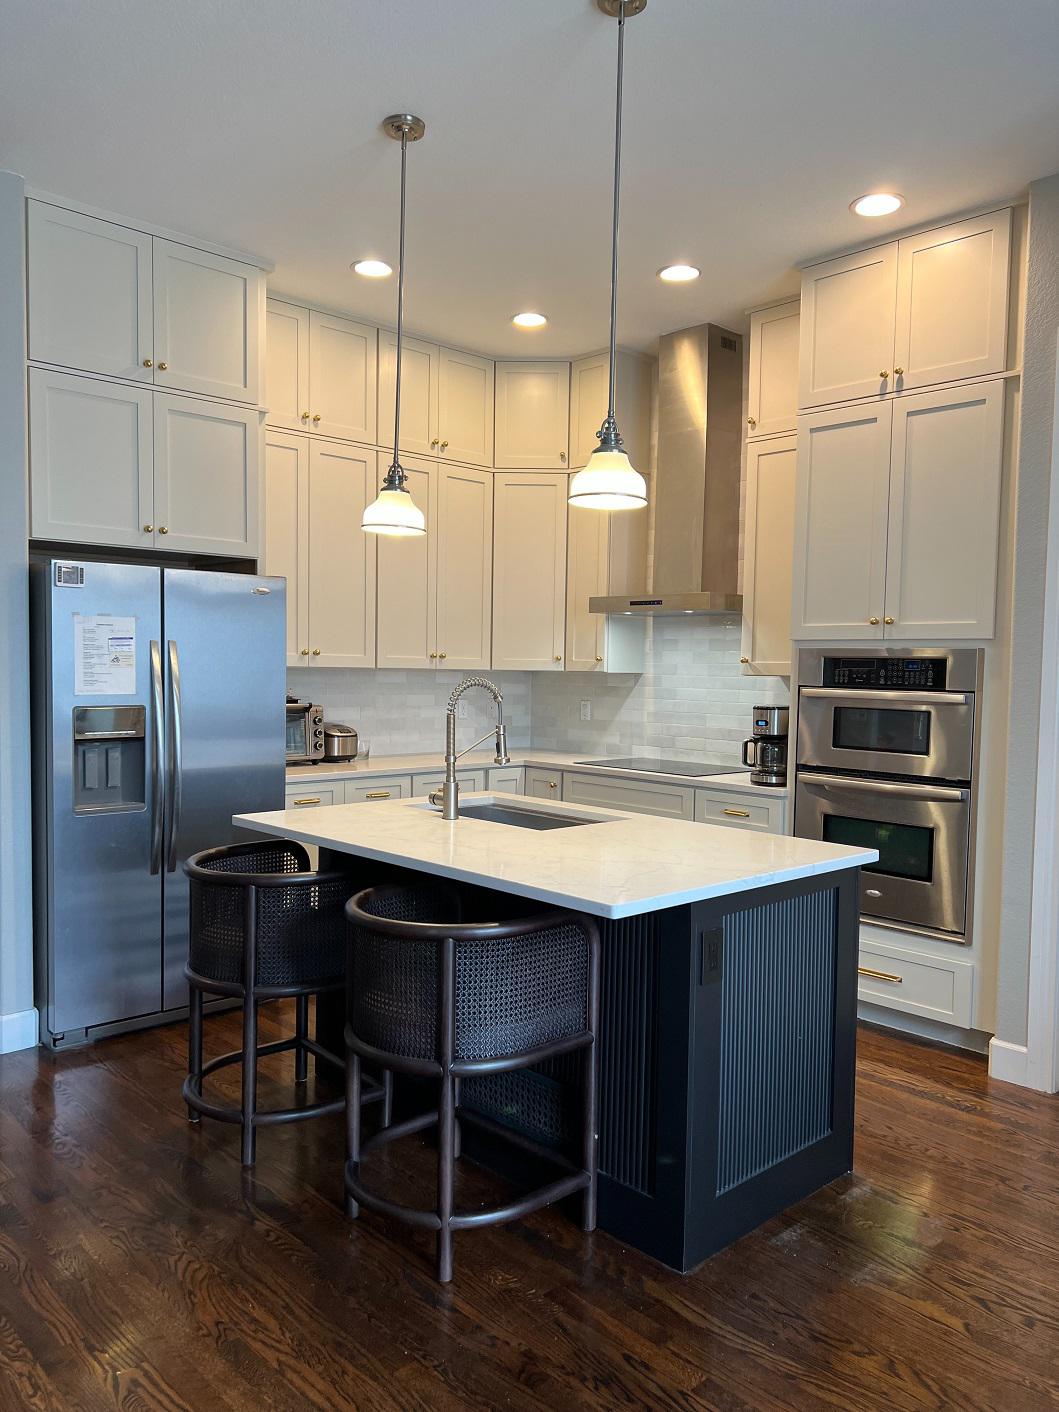 Say goodbye to outdated cabinets and hello to a fresh, modern look that will leave you in awe. We of Kitchen Tune-Up Savannah Brunswick Savannah (912)424-8907